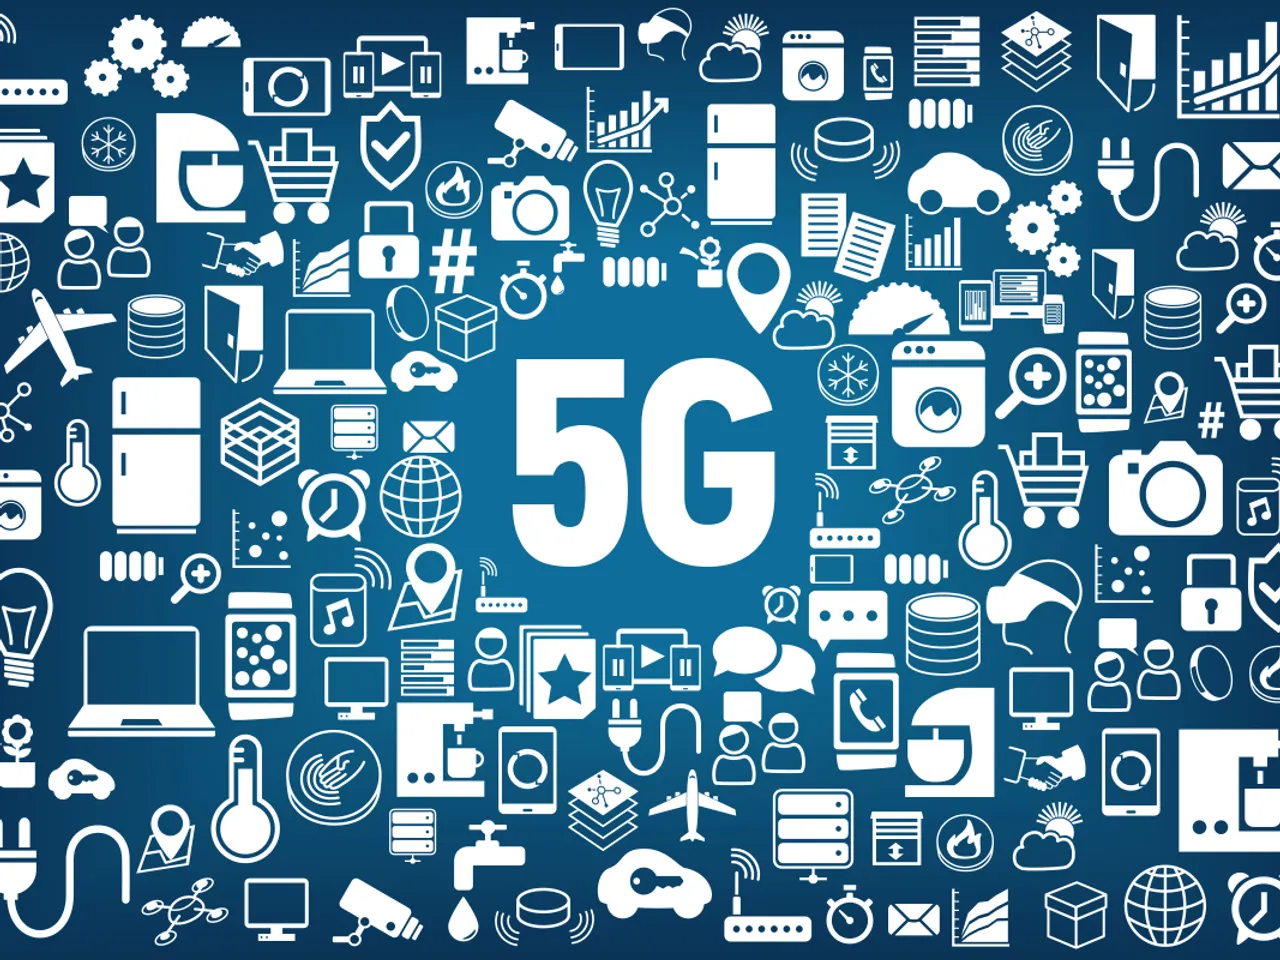 5G Slicing Looks At New Growth in the Industry, to Generate Revenue of US$20 Billion by 2024